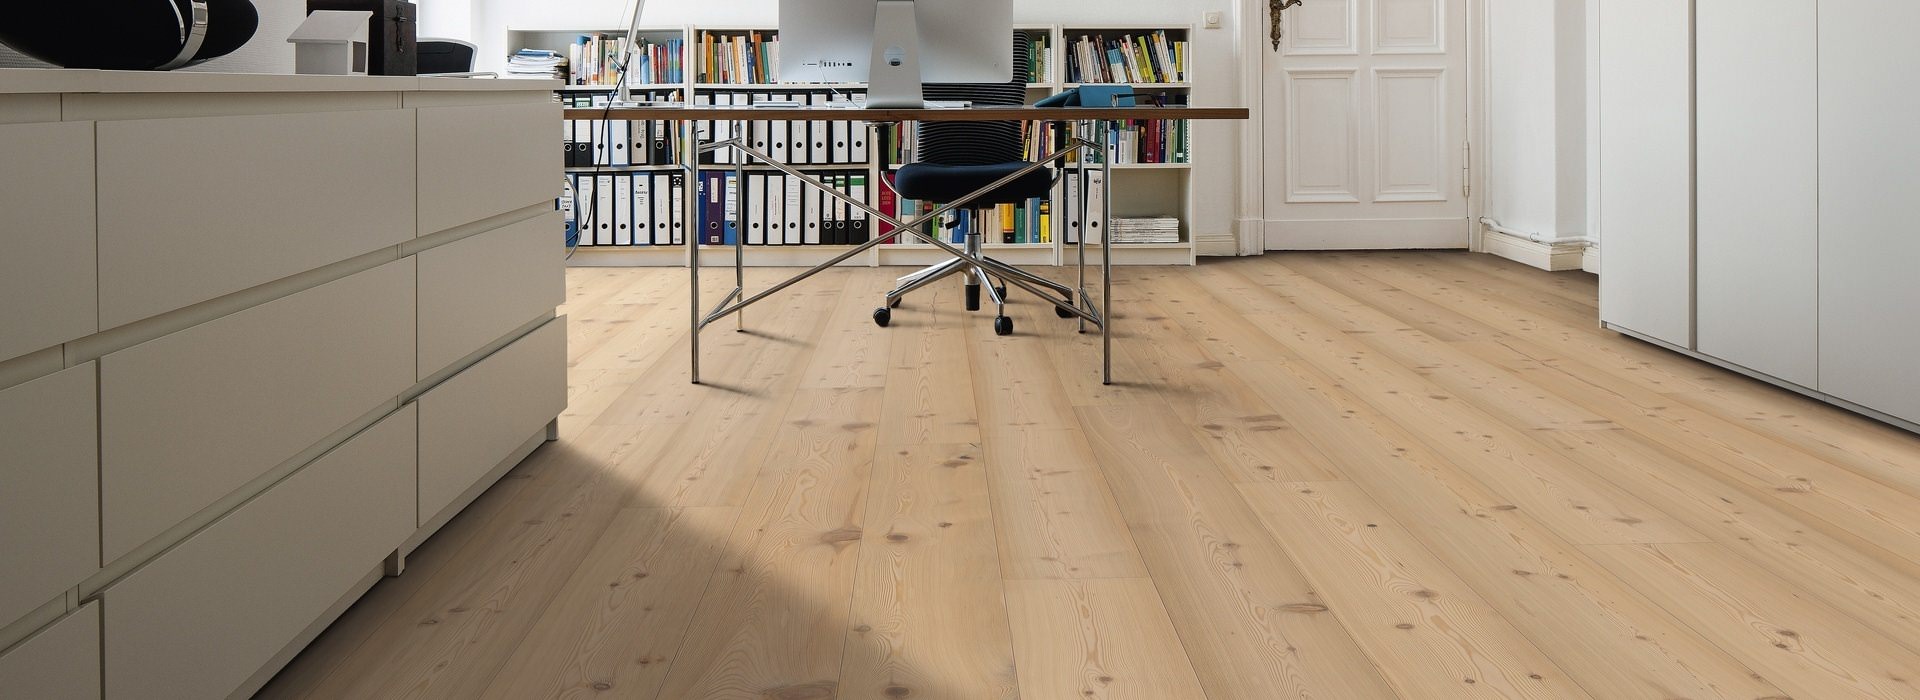 HARO PARQUET 4000 Plank 1-Strip 180 4V Larch Puro White Universal brushed naturaLin plus Top Connect